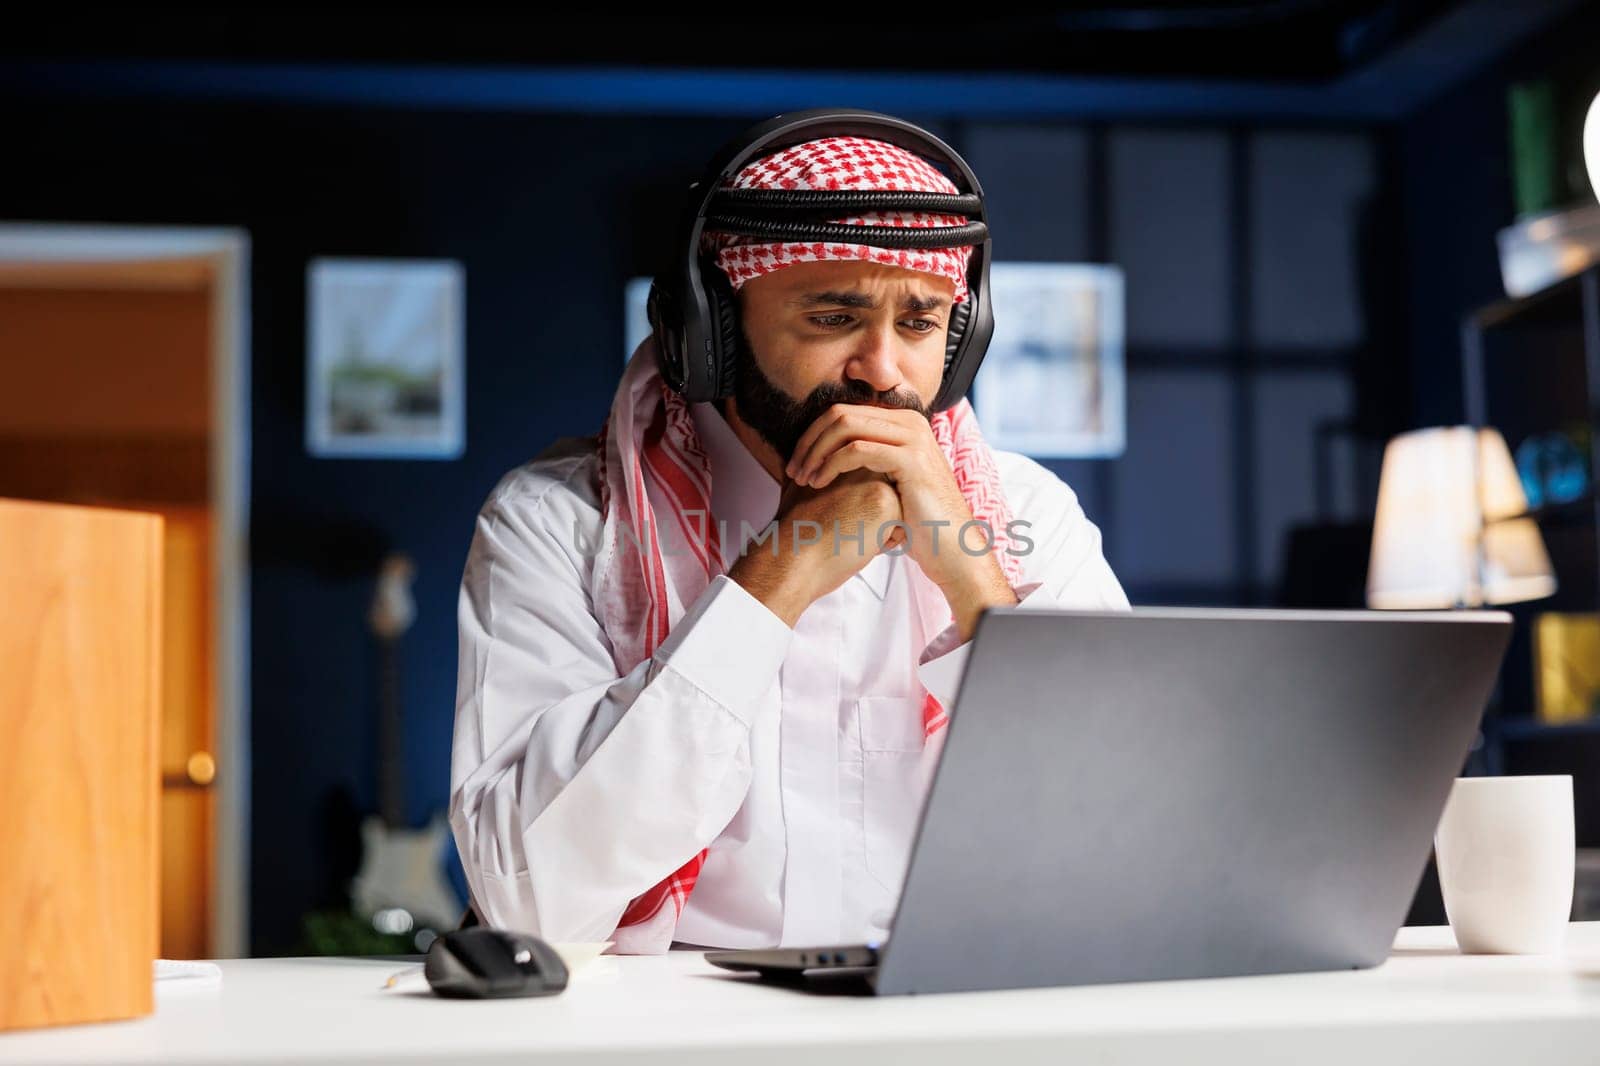 A focused man in traditional Arabic attire works diligently at his desk, utilizing wireless technology. He researches online, communicates, and engages in video conferencing on his personal computer.